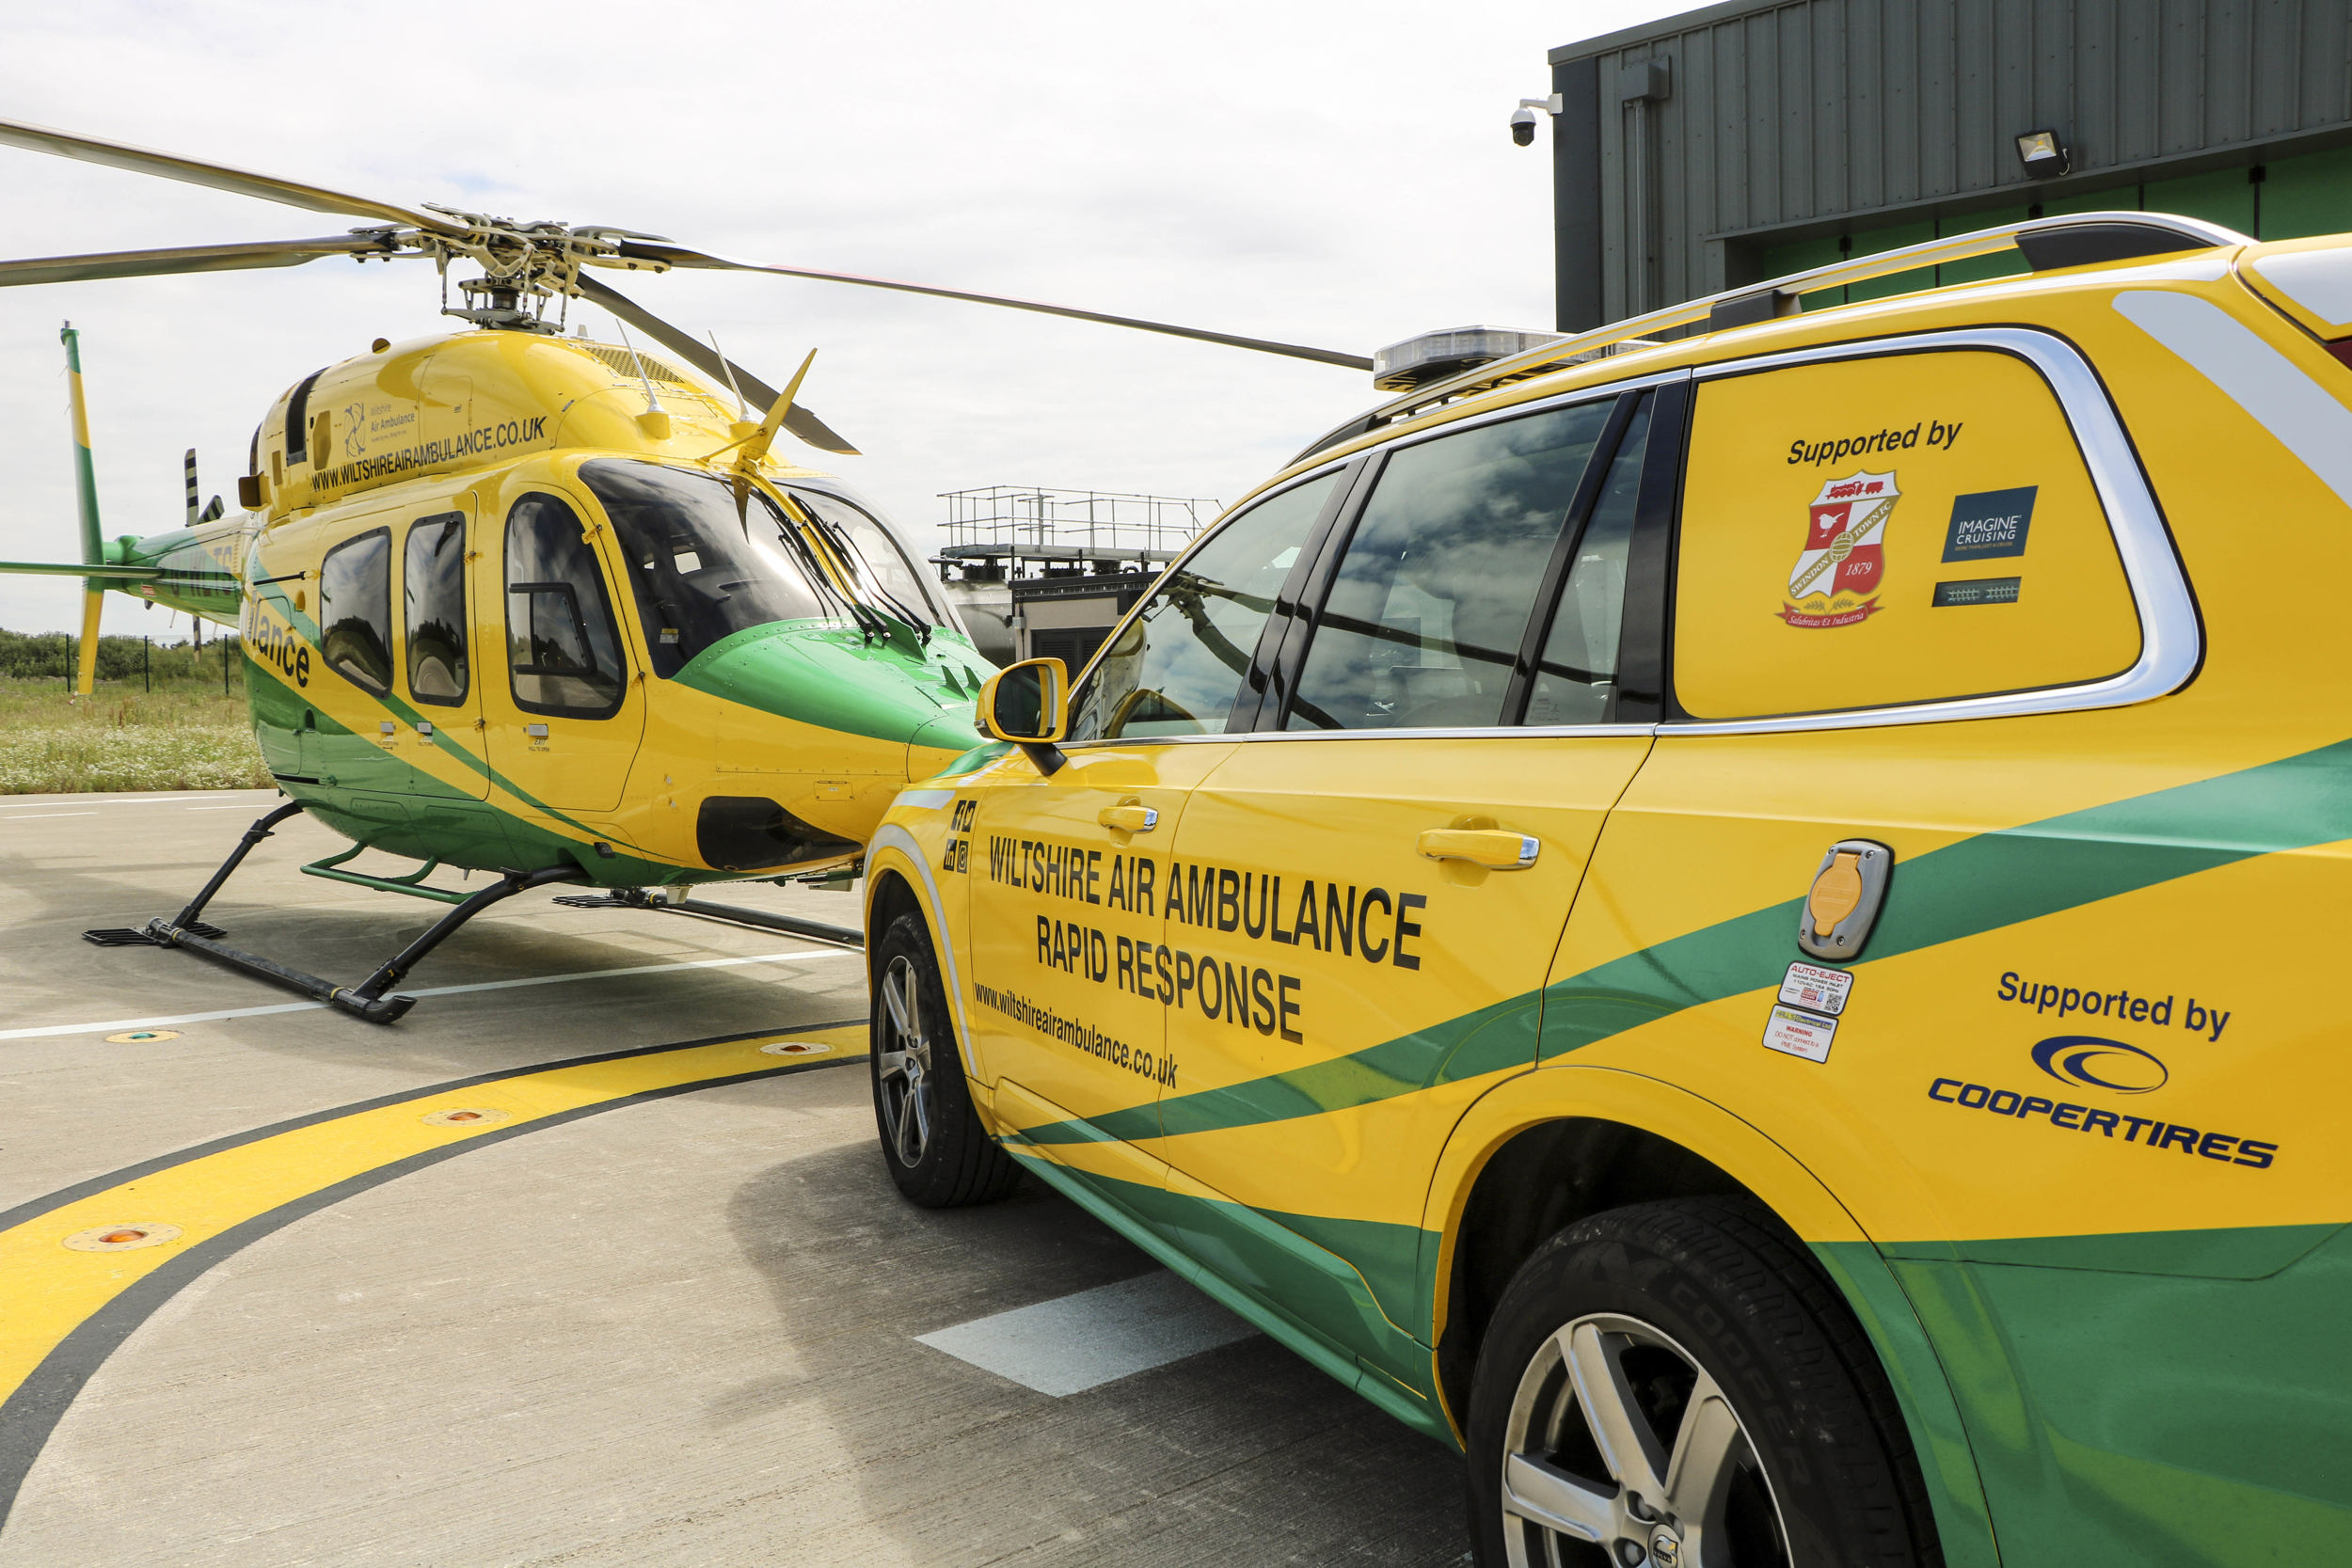 The Wiltshire Air Ambulance helicopter and critical care car on the helipad at the airbase.